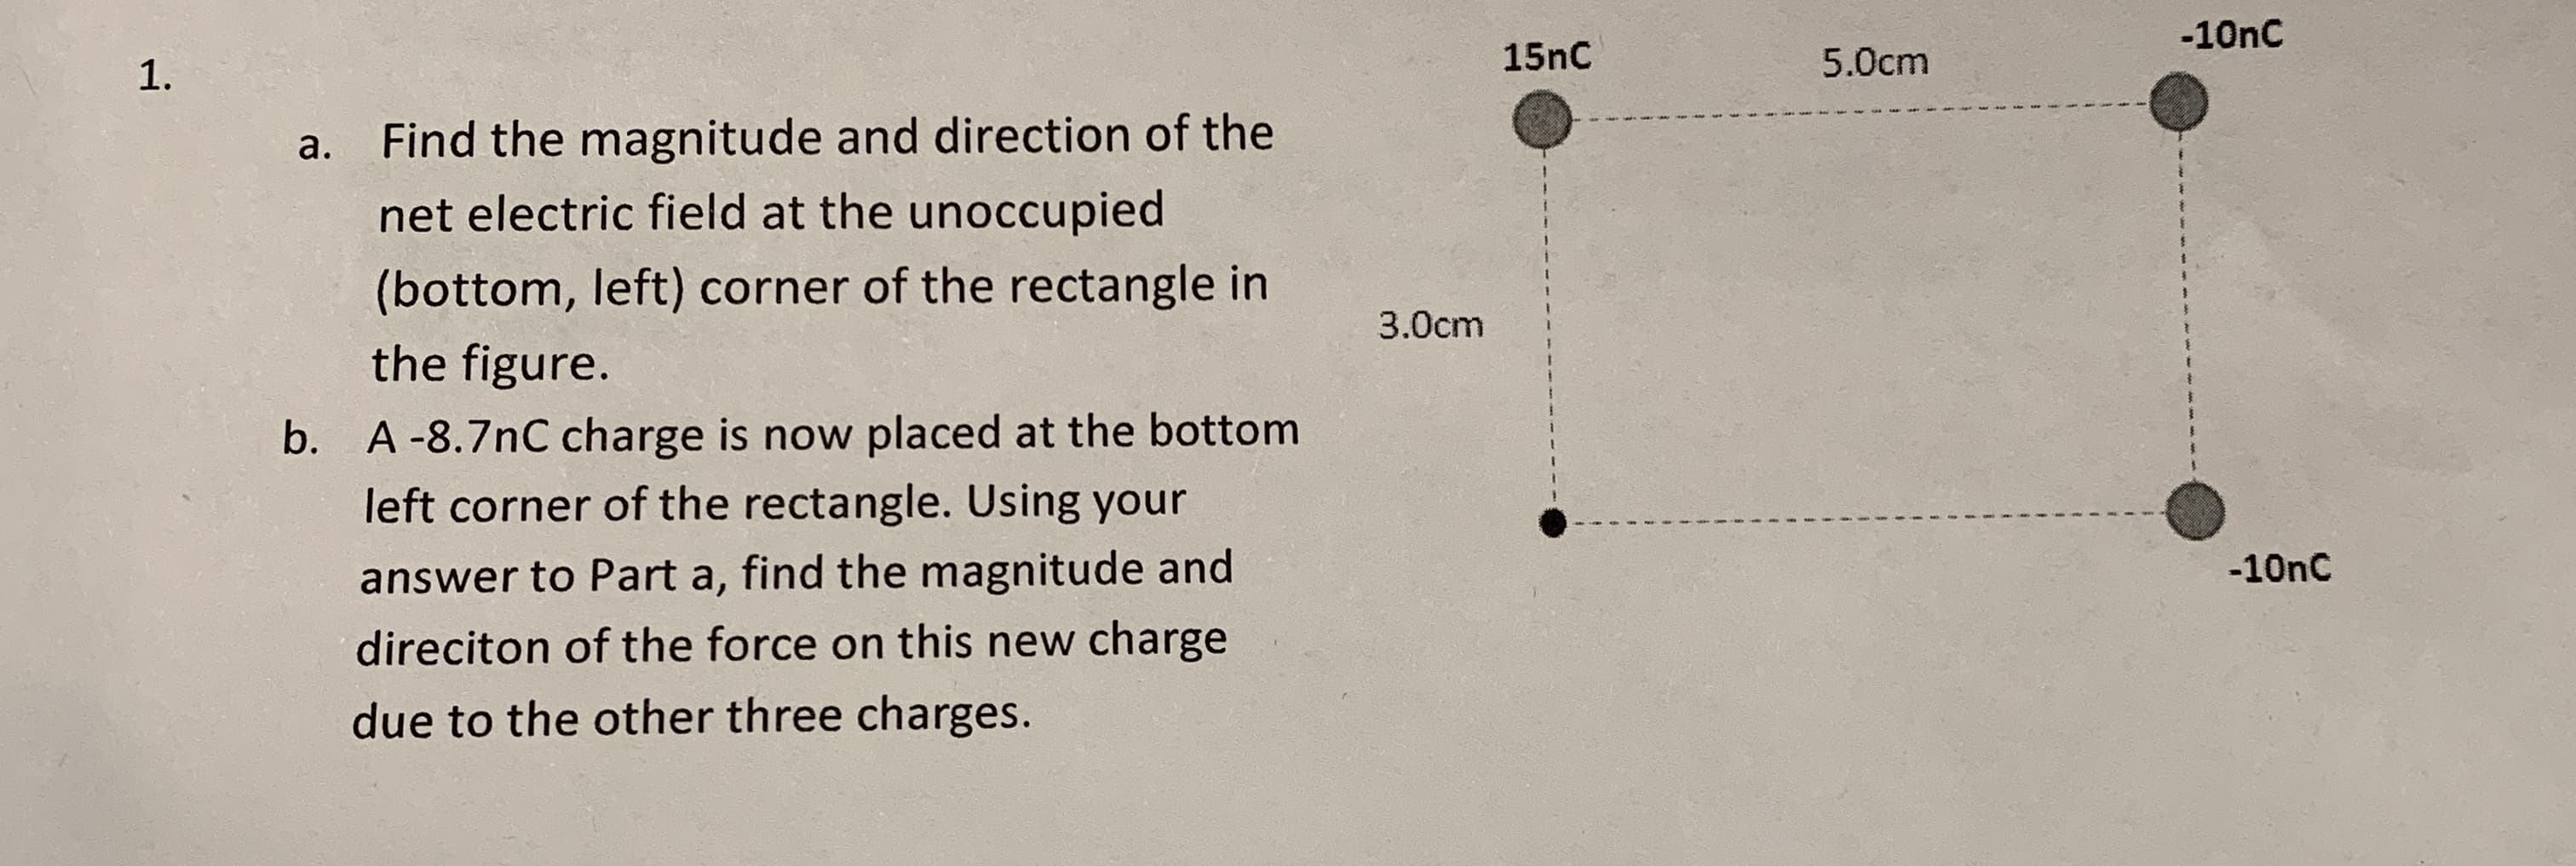 -10nC
1.
15nC
5.0cm
Find the magnitude and direction of the
net electric field at the unoccupied
a.
(bottom, left) corner of the rectangle in
3.0cm
the figure.
b. A-8.7nC charge is now placed at the bottom
left corner of the rectangle. Using your
answer to Part a, find the magnitude and
-10nC
direciton of the force on this new charge
due to the other three charges.
